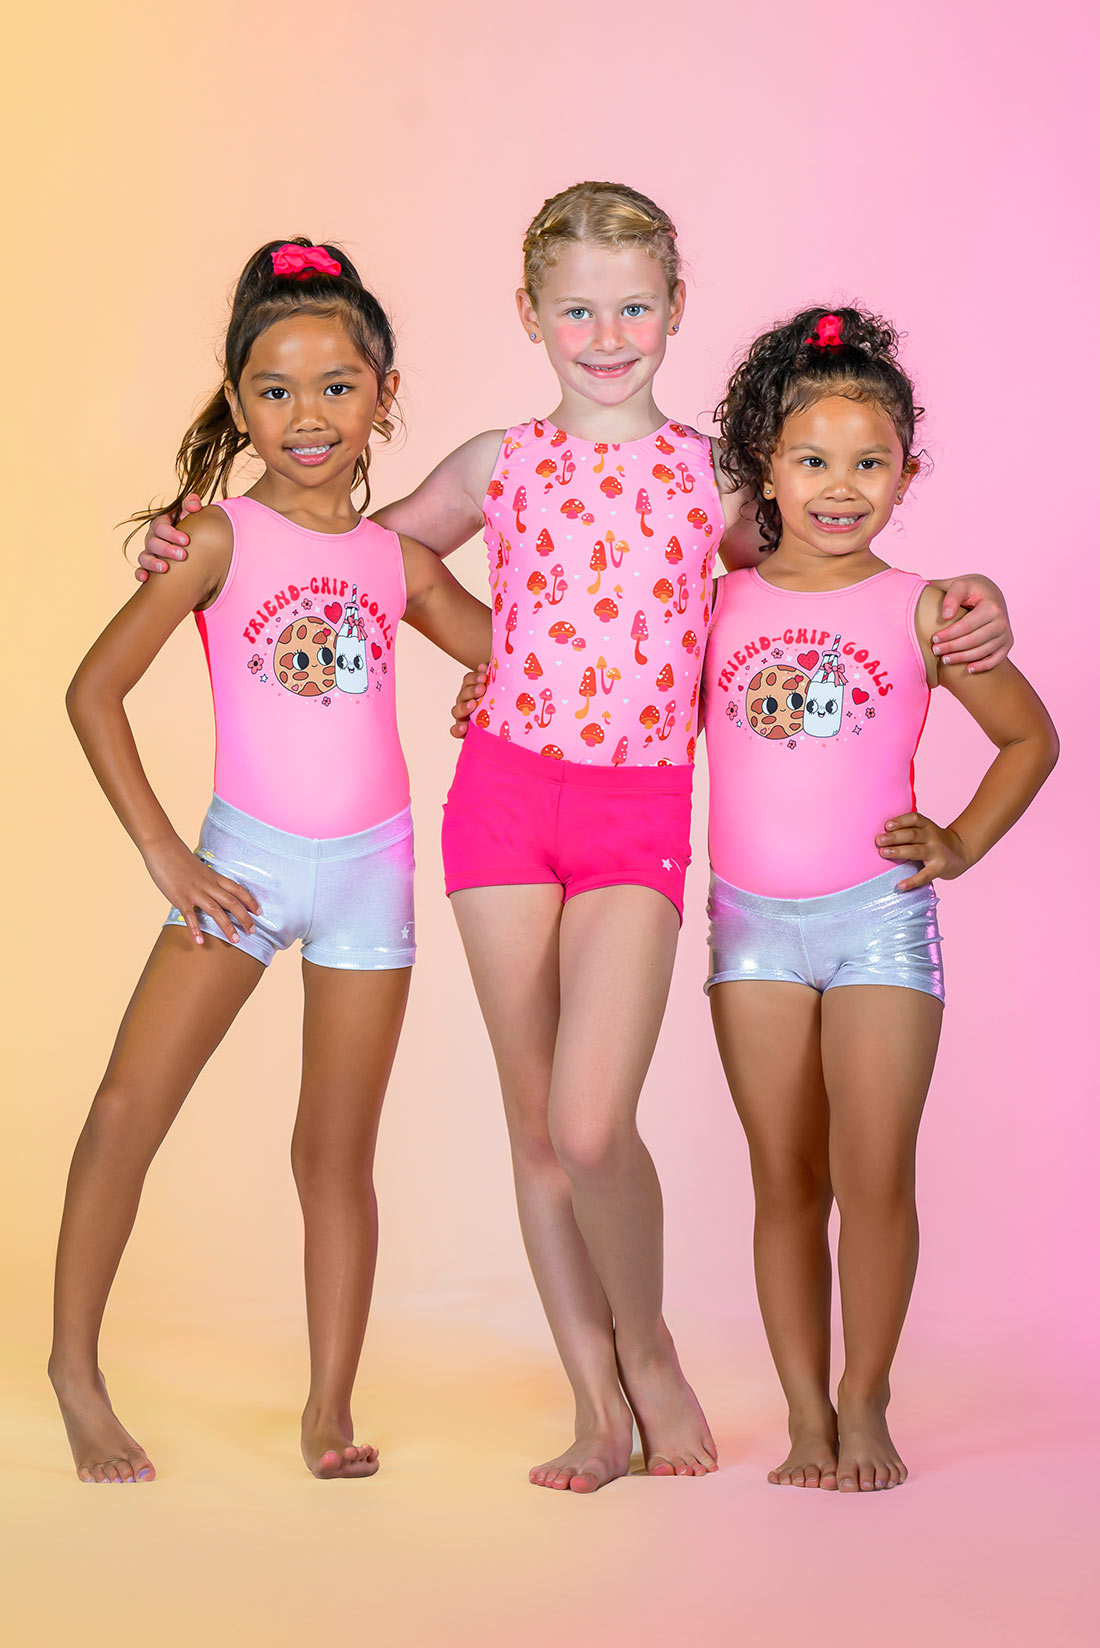 Pink gymnastics outfits for girls by Destira, 2023